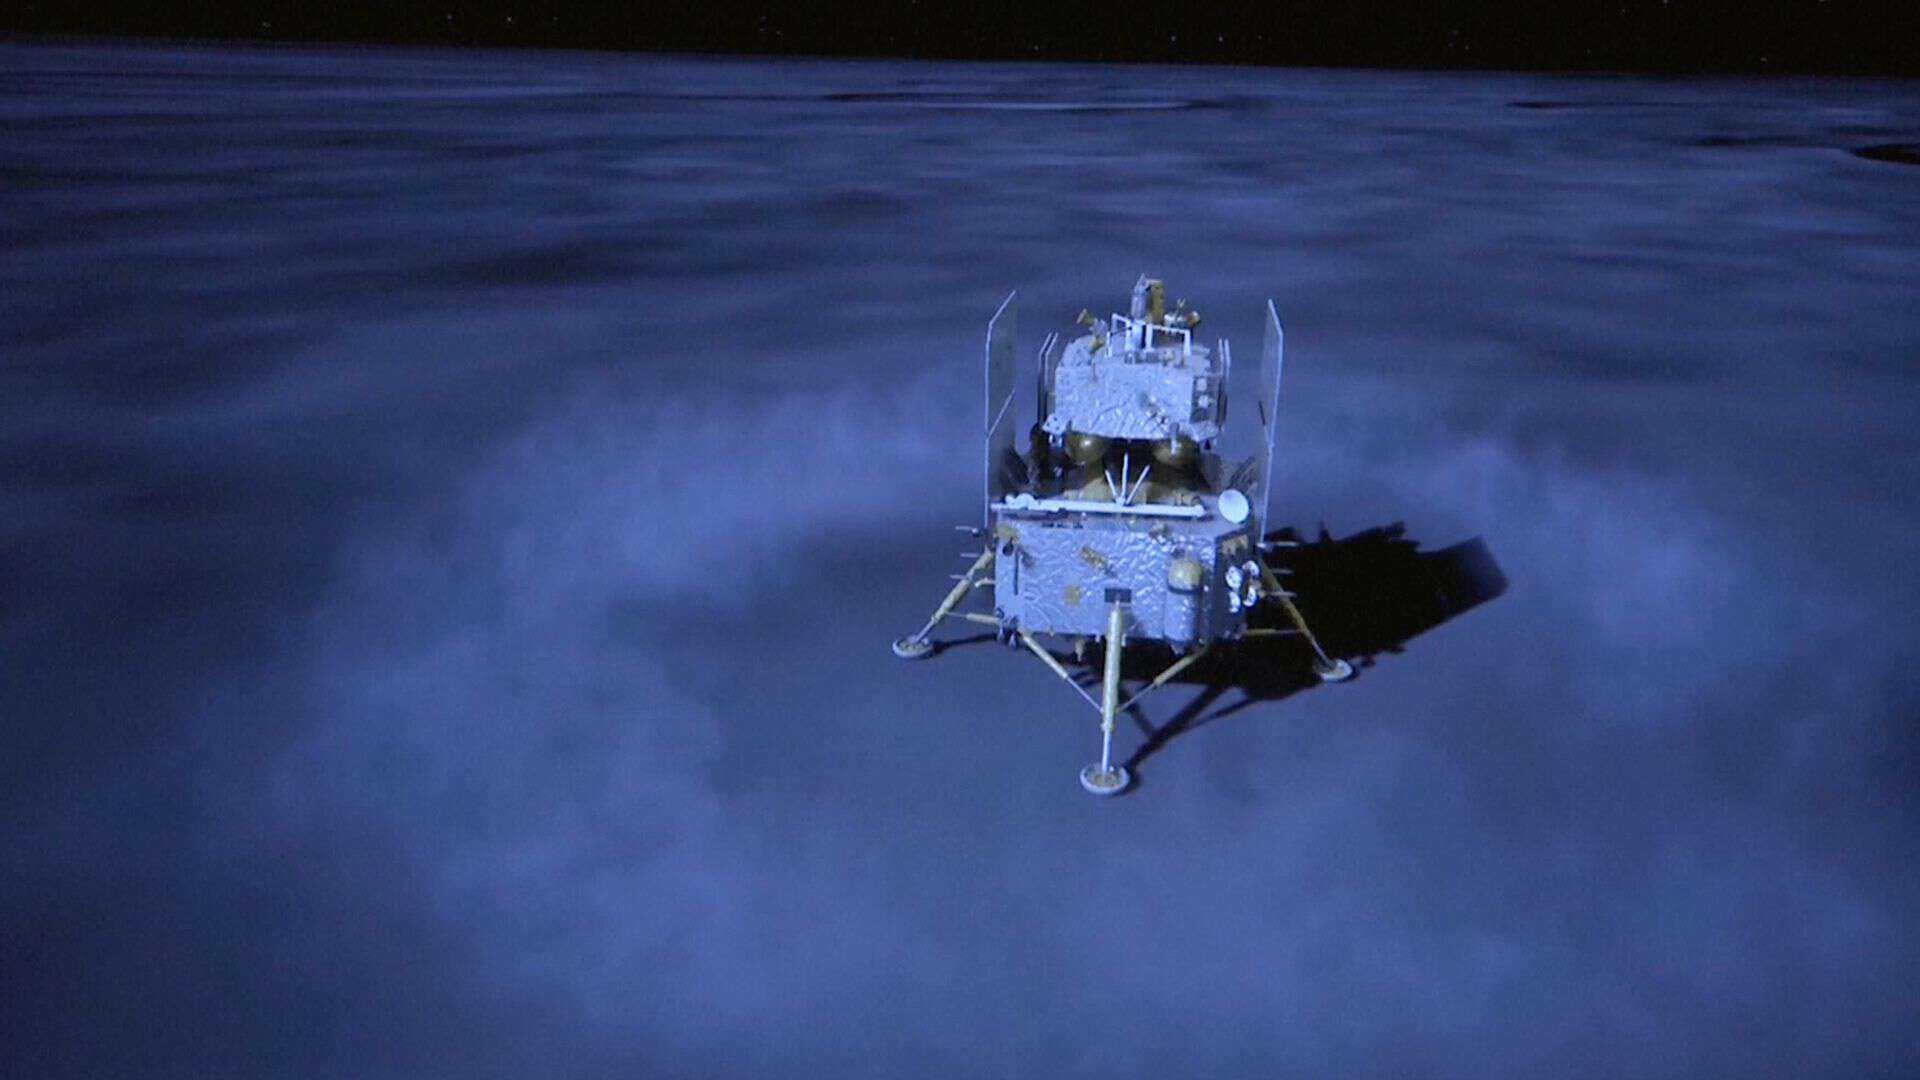 Chang'e 6 spacecraft on the far side of the moon after landing